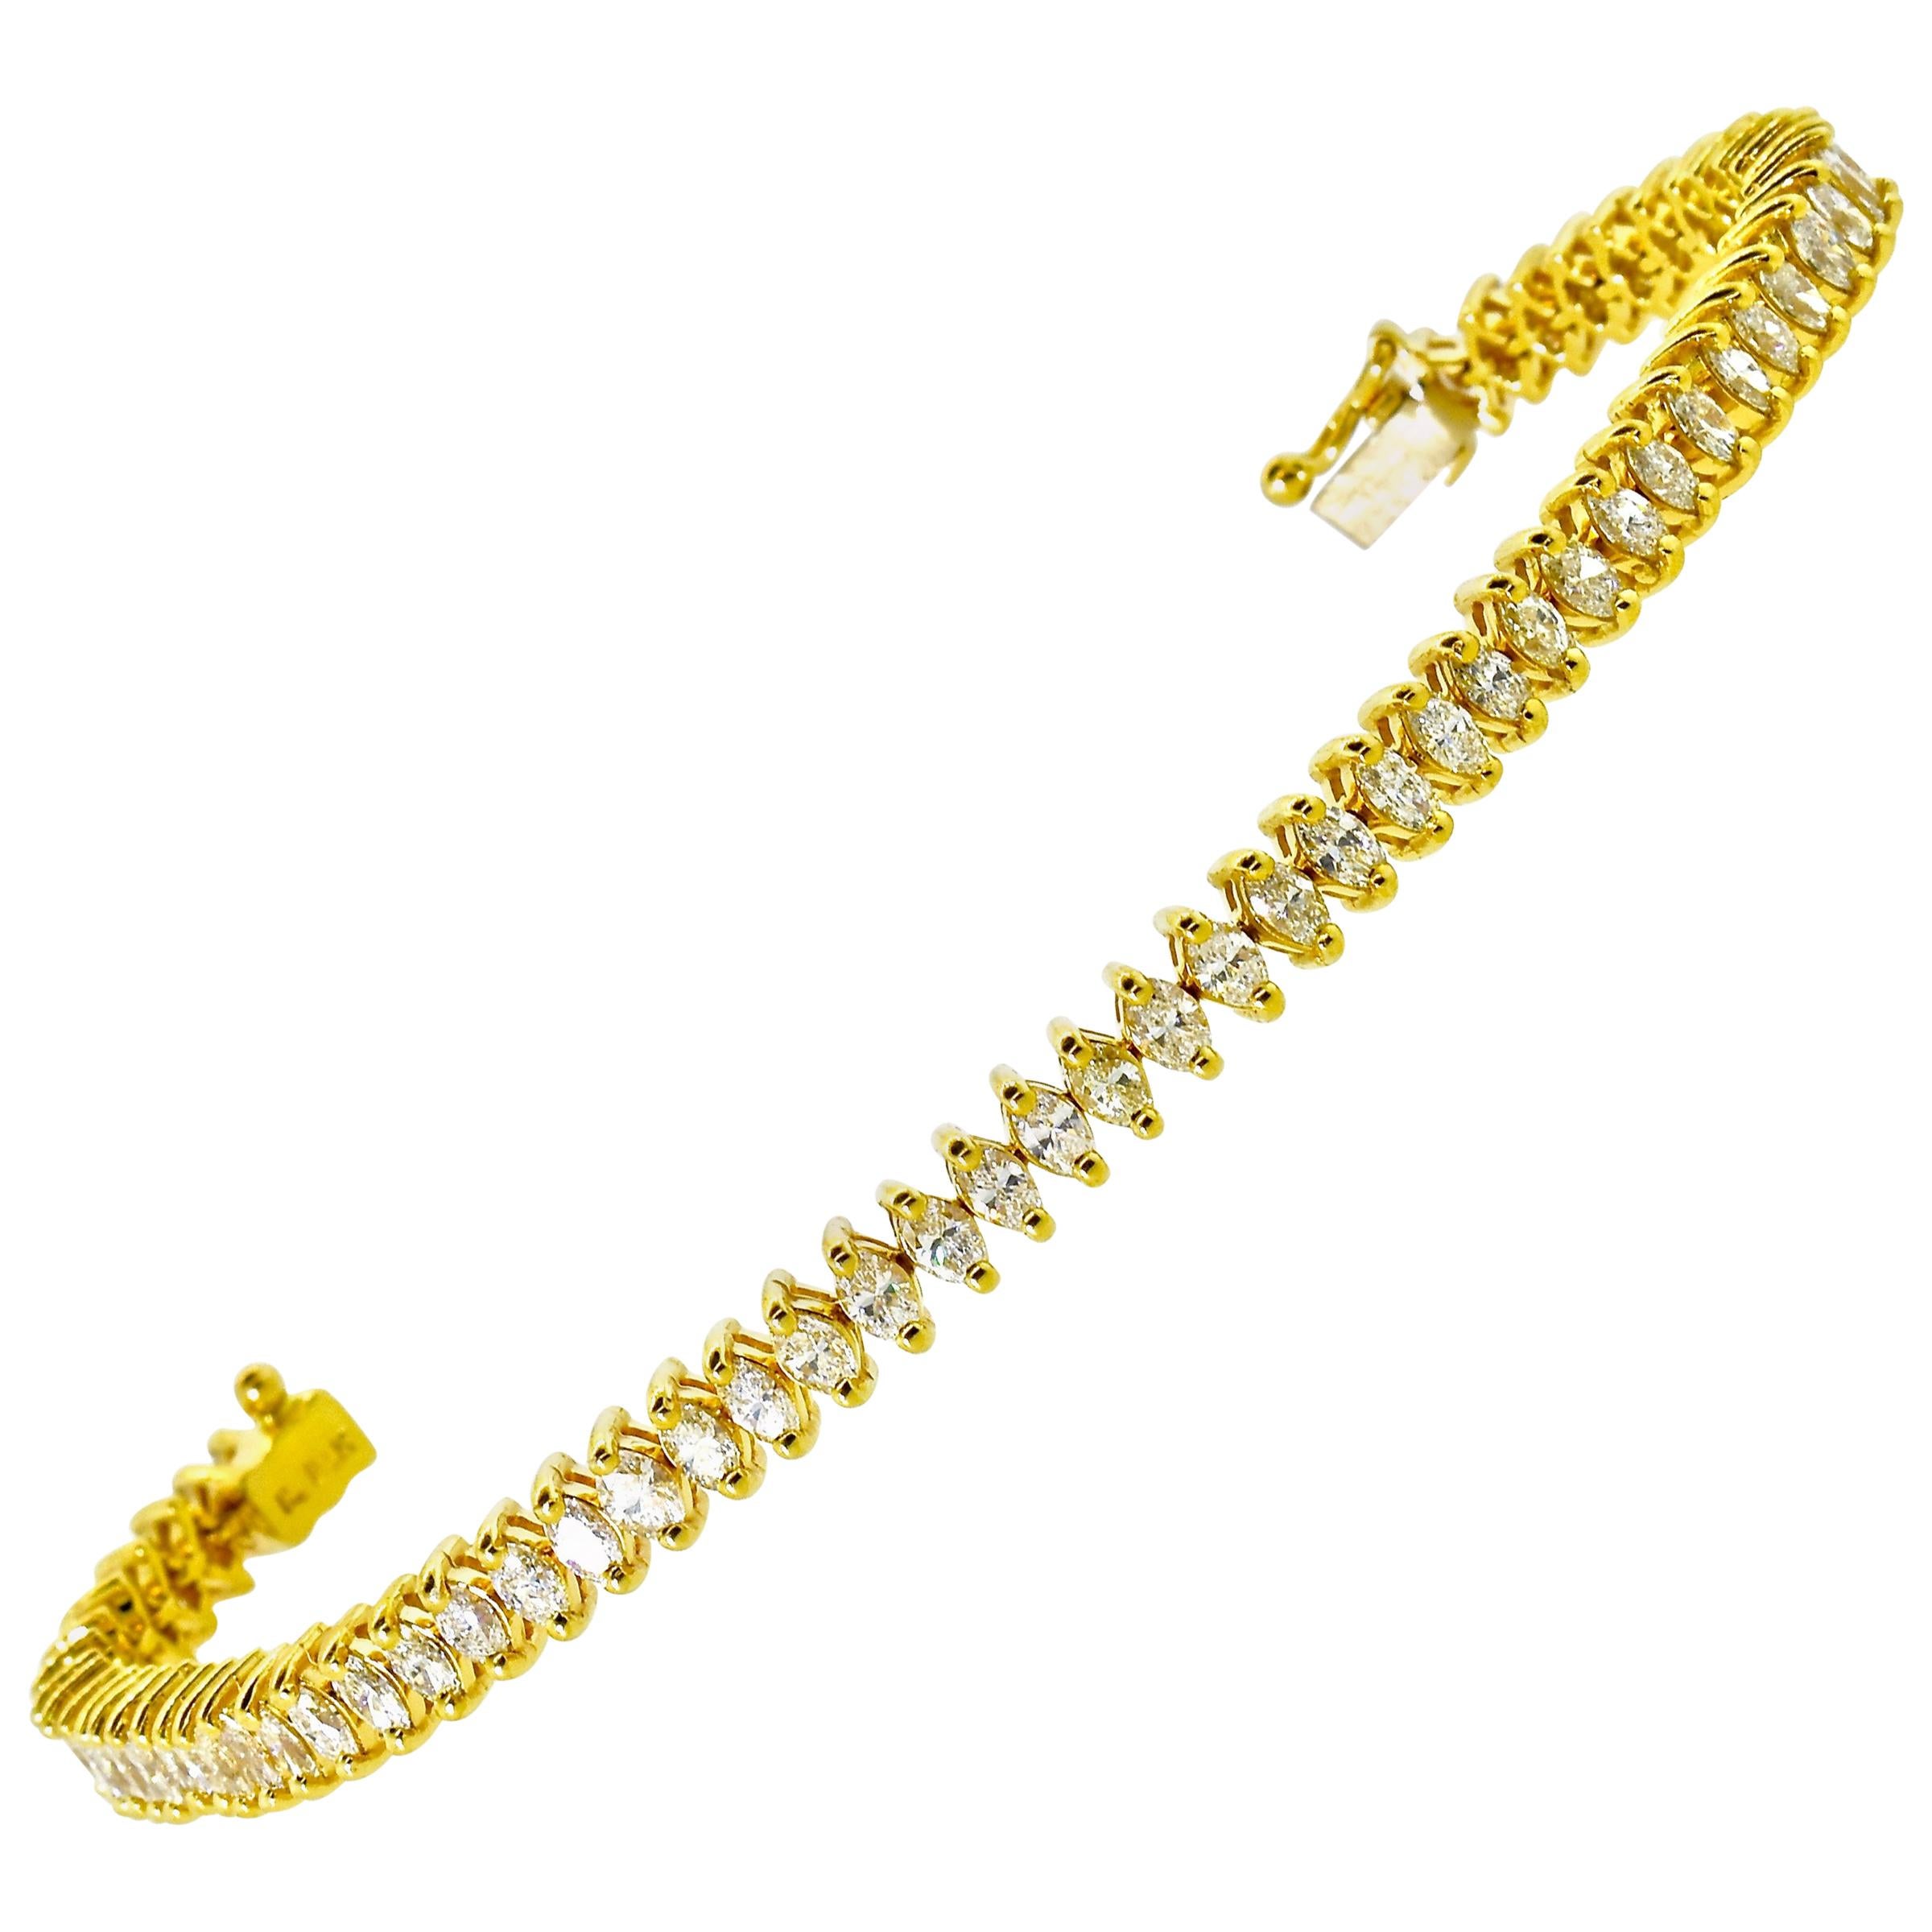 Diamond and gold well made contemporary bracelet possessing 63  well cut and finely match marquis diamonds.  These diamonds are estimated all to be near colorless (H), and very slightly included (VS).  The total weight is 3.75 cts. This highly